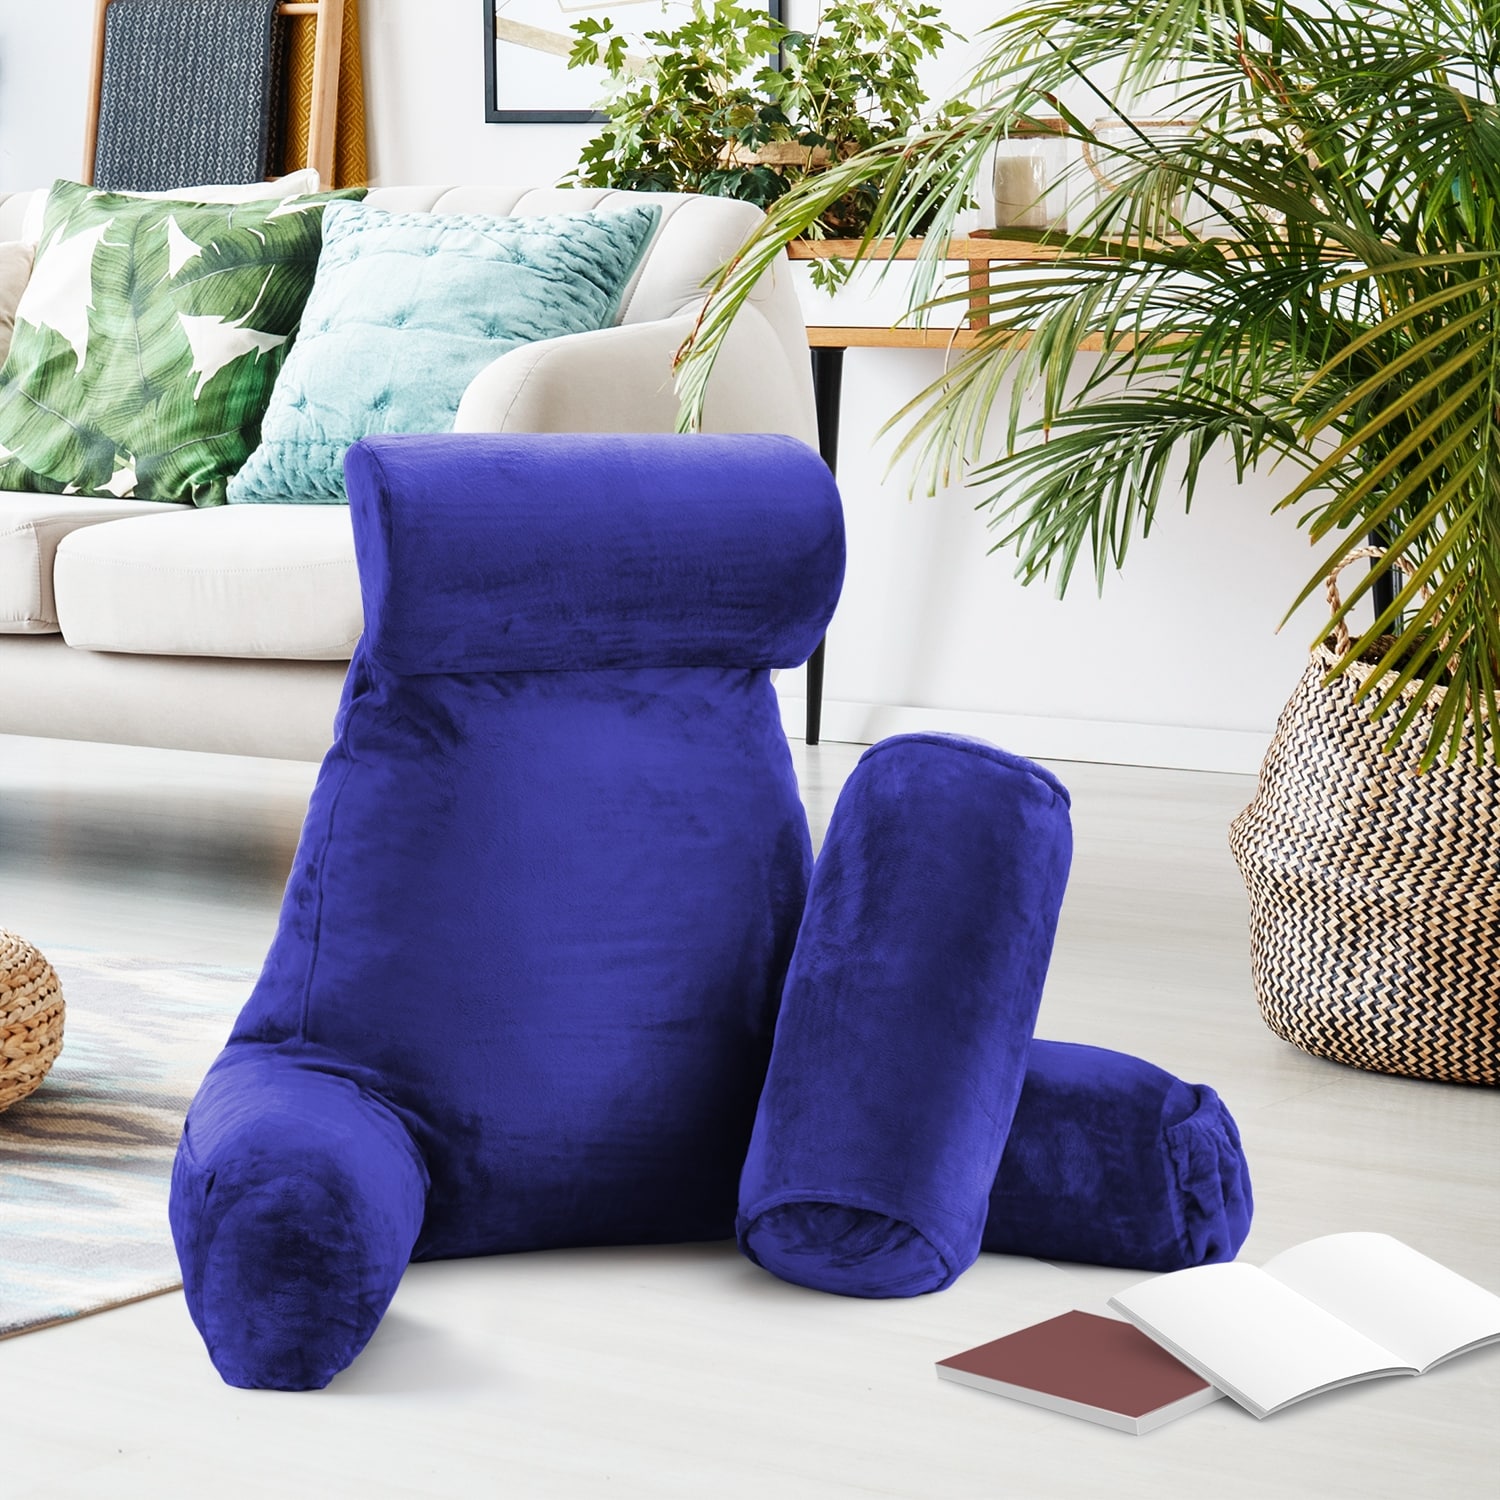 https://ak1.ostkcdn.com/images/products/is/images/direct/dac64564b1e04d888f4220bf5db4d81f07149bc9/Nestl-Backrest-Reading-Pillow-with-Arms---Shredded-Memory-Foam-Back-Support-Bed-Rest-Pillow.jpg